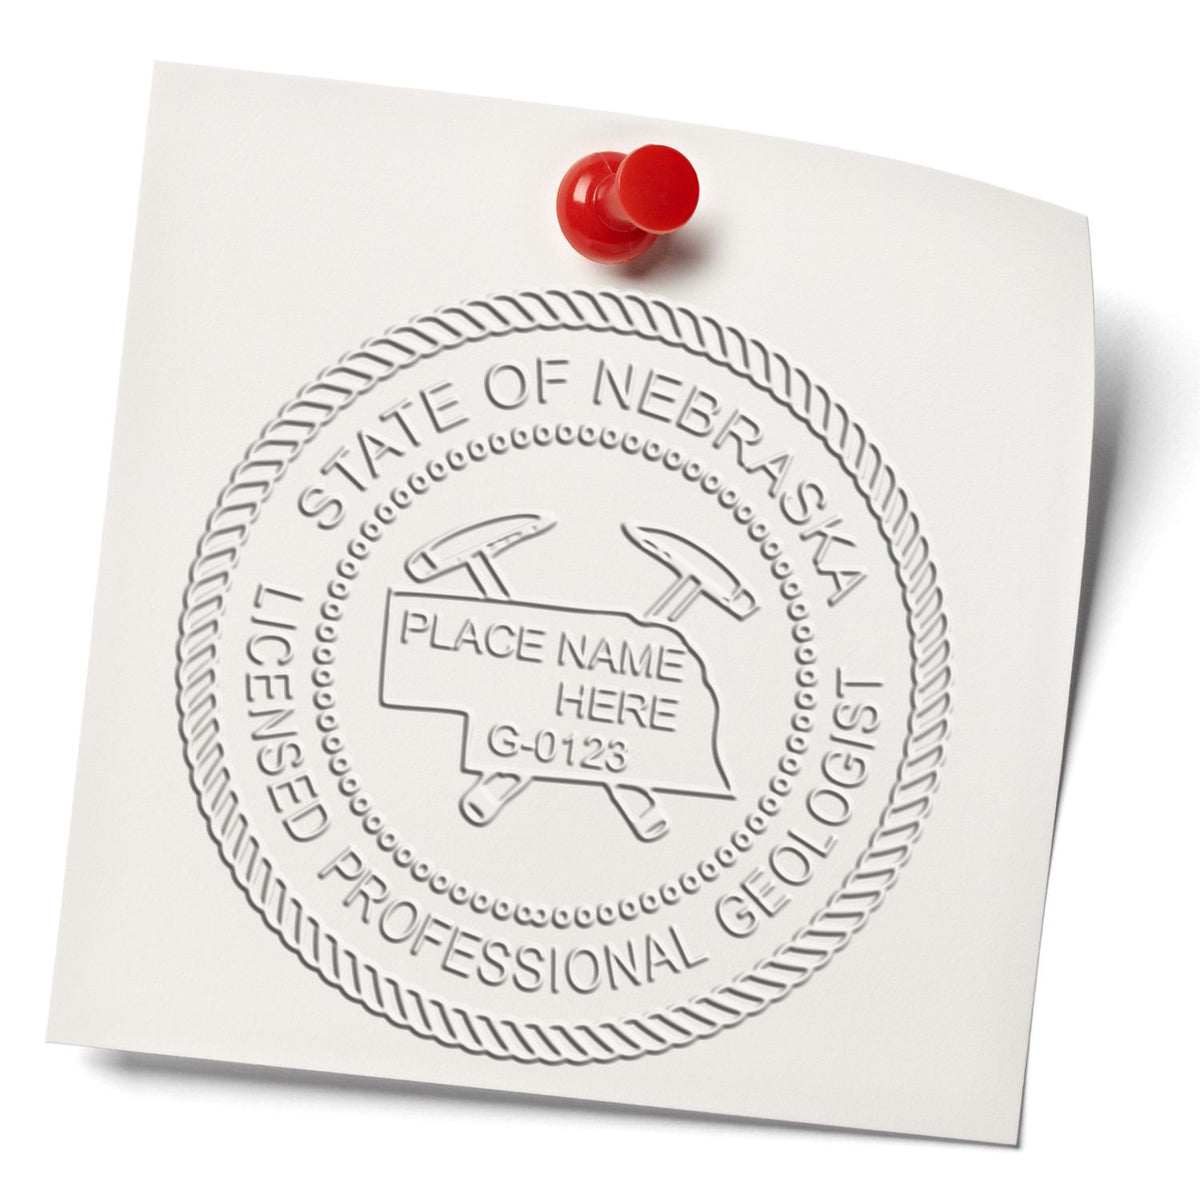 An in use photo of the Long Reach Nebraska Geology Seal showing a sample imprint on a cardstock